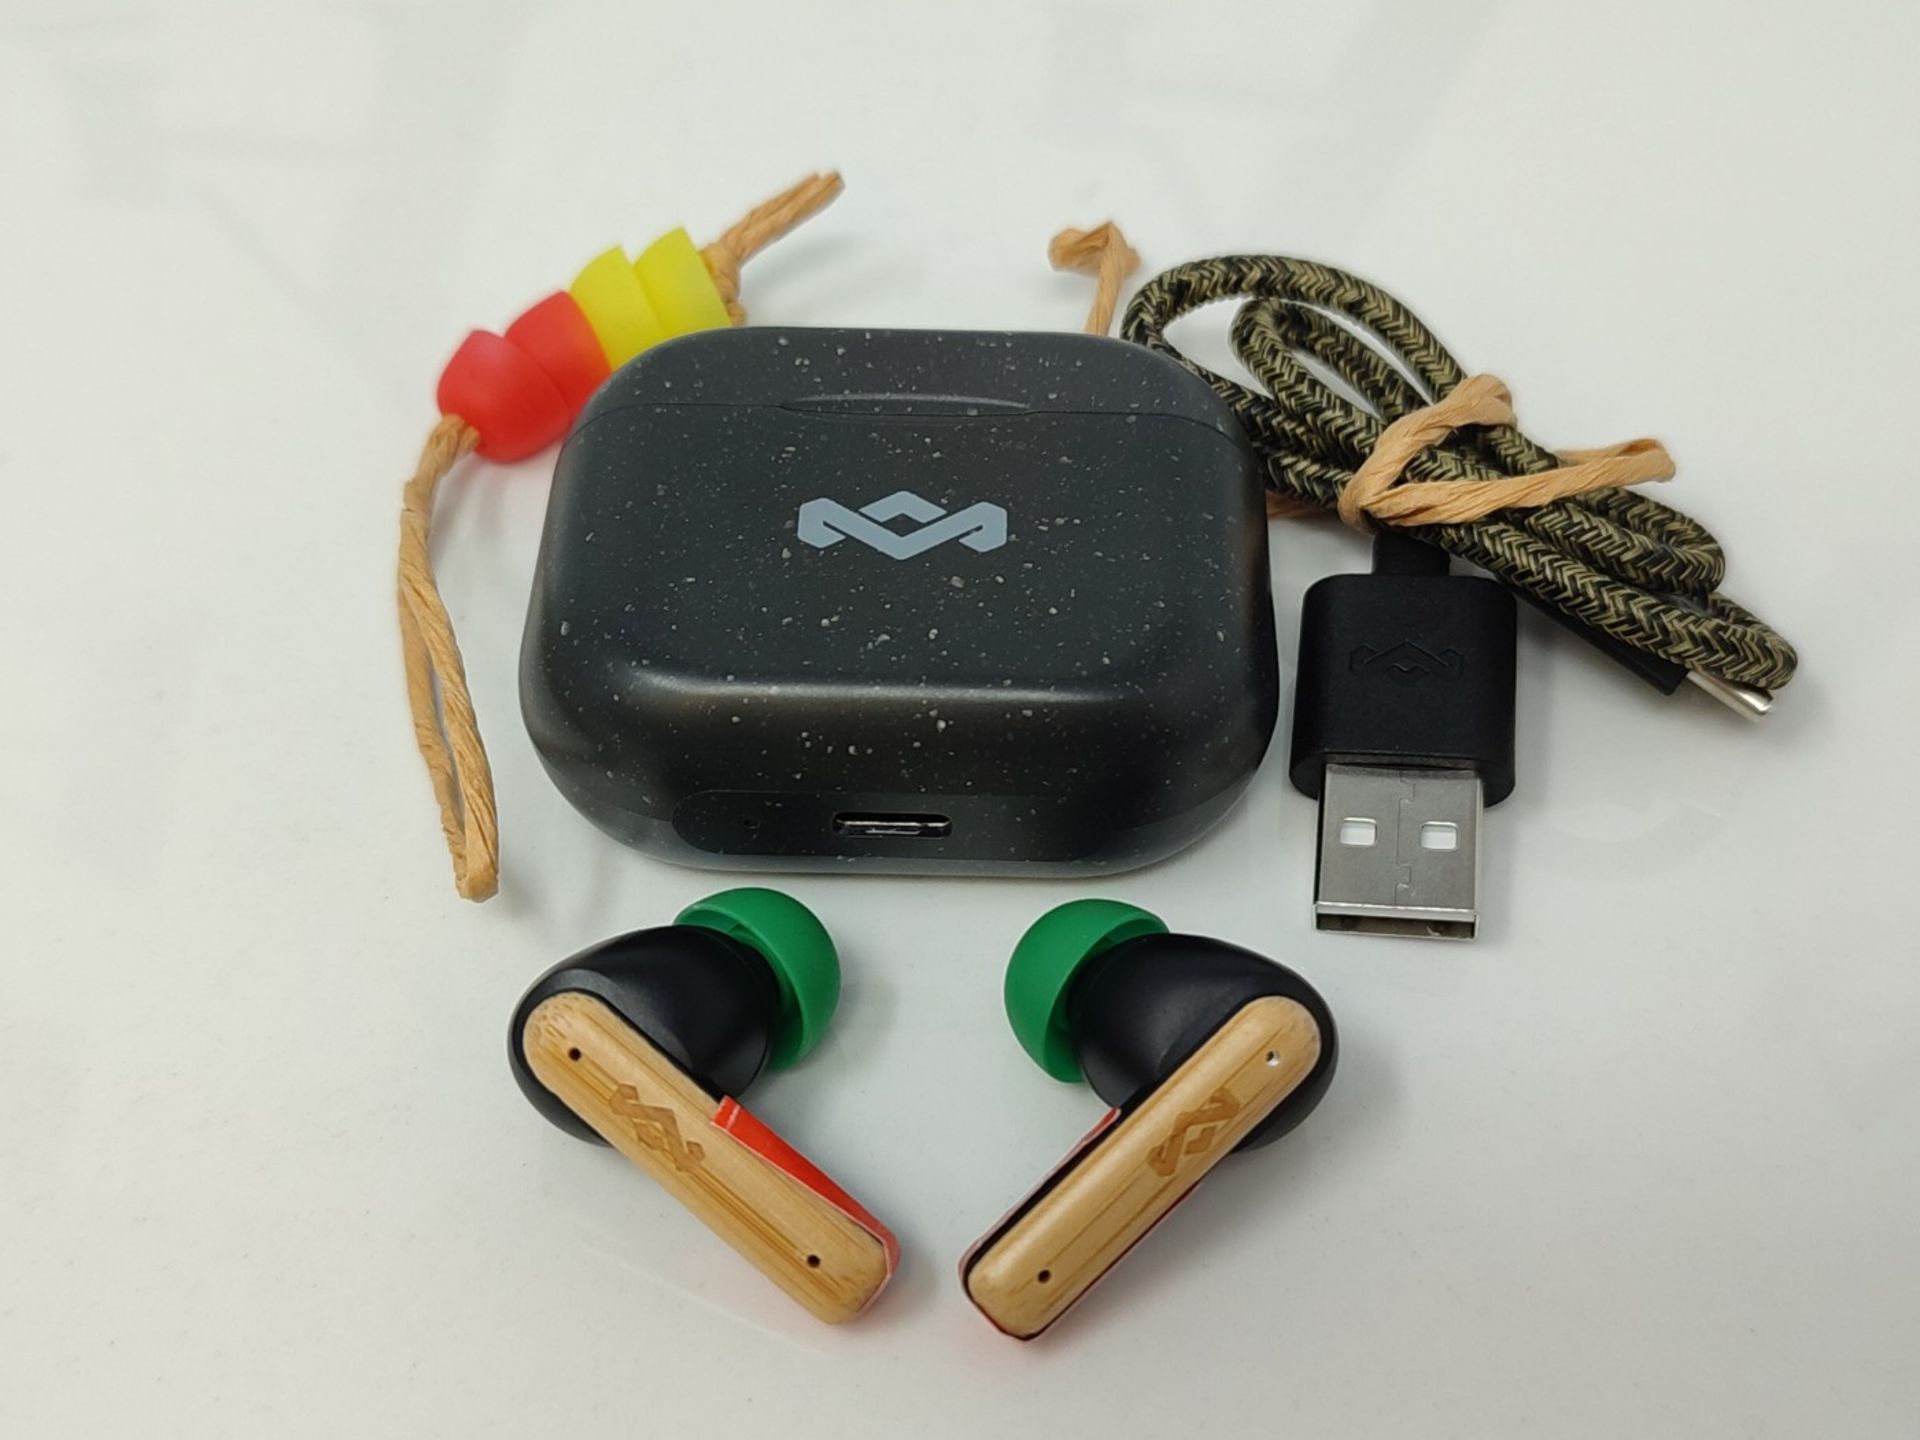 House of Marley Little Bird True Wireless Earbuds, Touch Controls, Built-in Microphone - Image 3 of 6